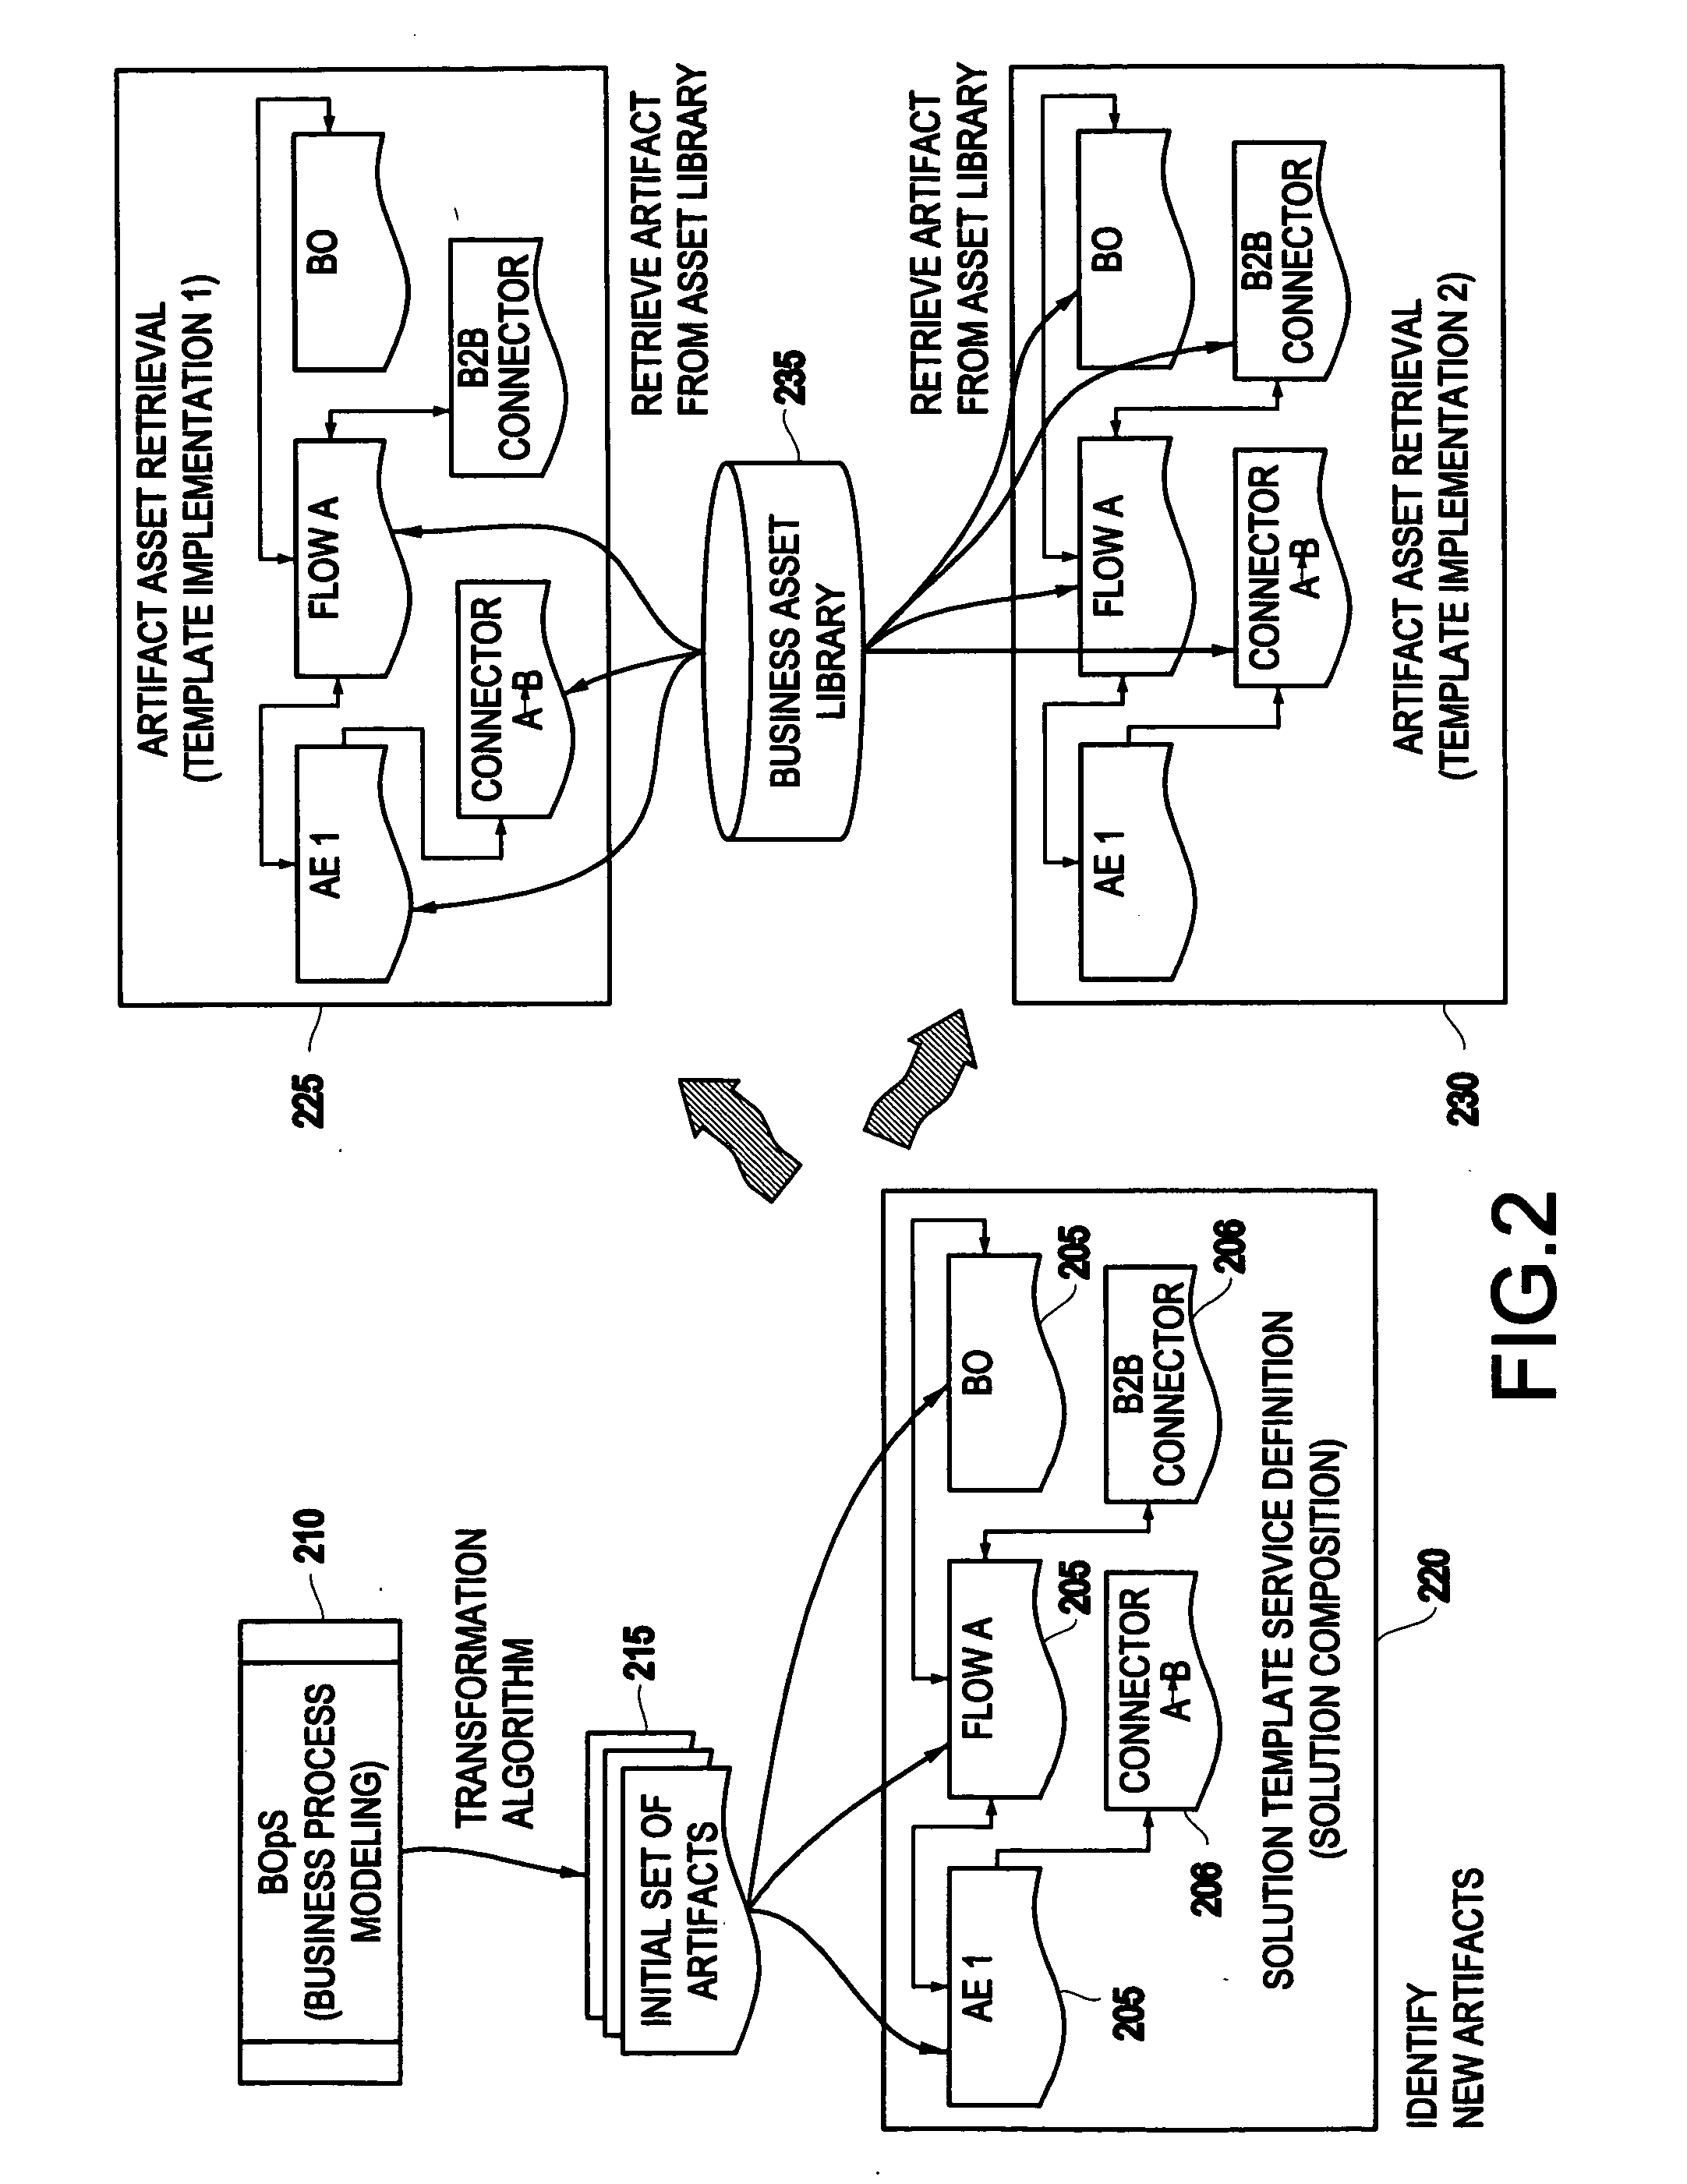 System and method for generating a business process integration and management (BPIM) solution